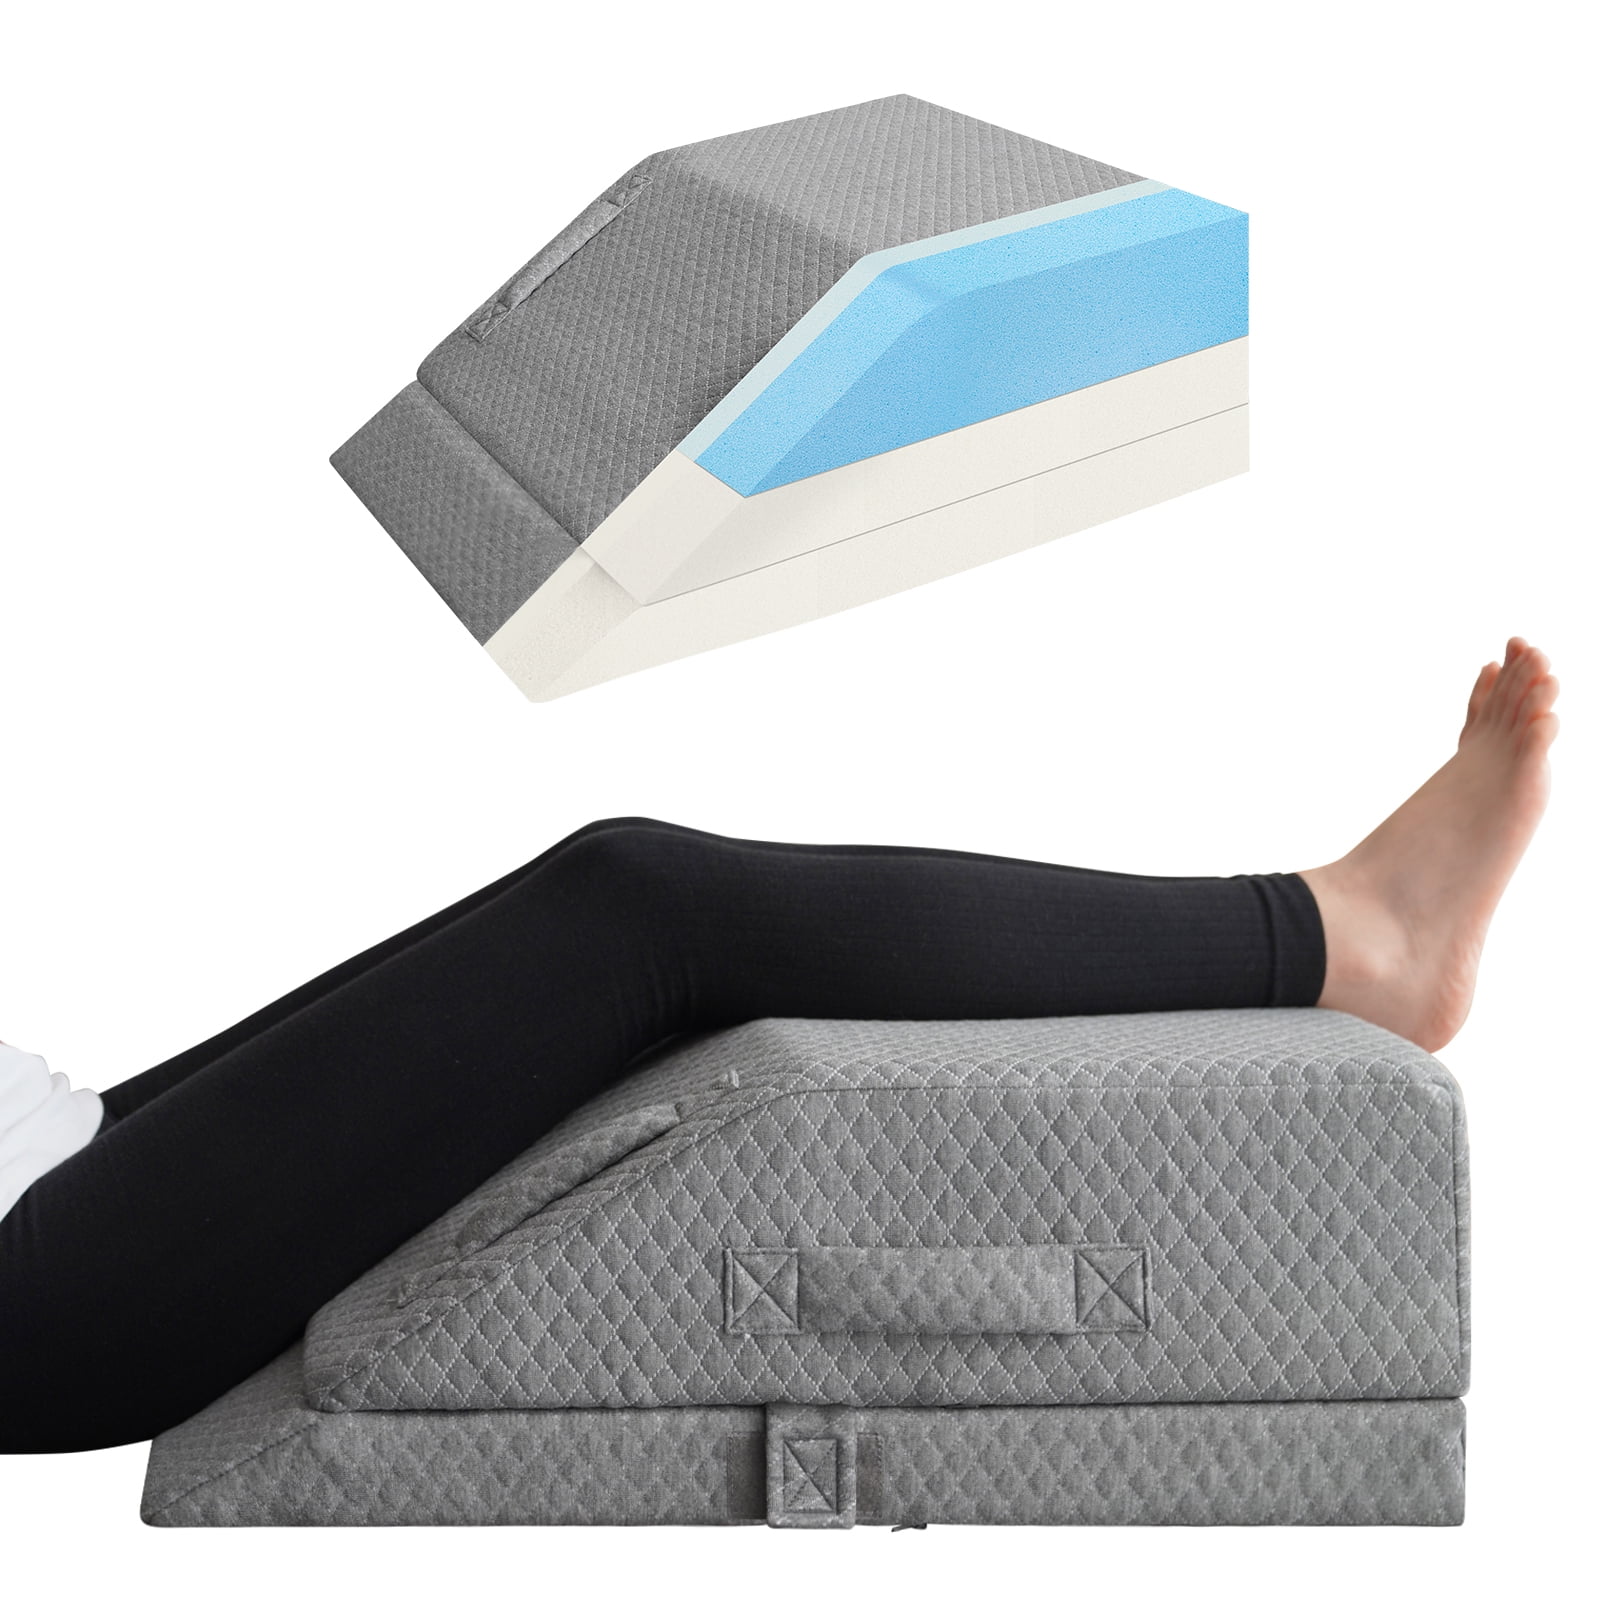 Abco Tech Leg Elevation Pillow with Cooling Gel Memory Foam Top 8in We